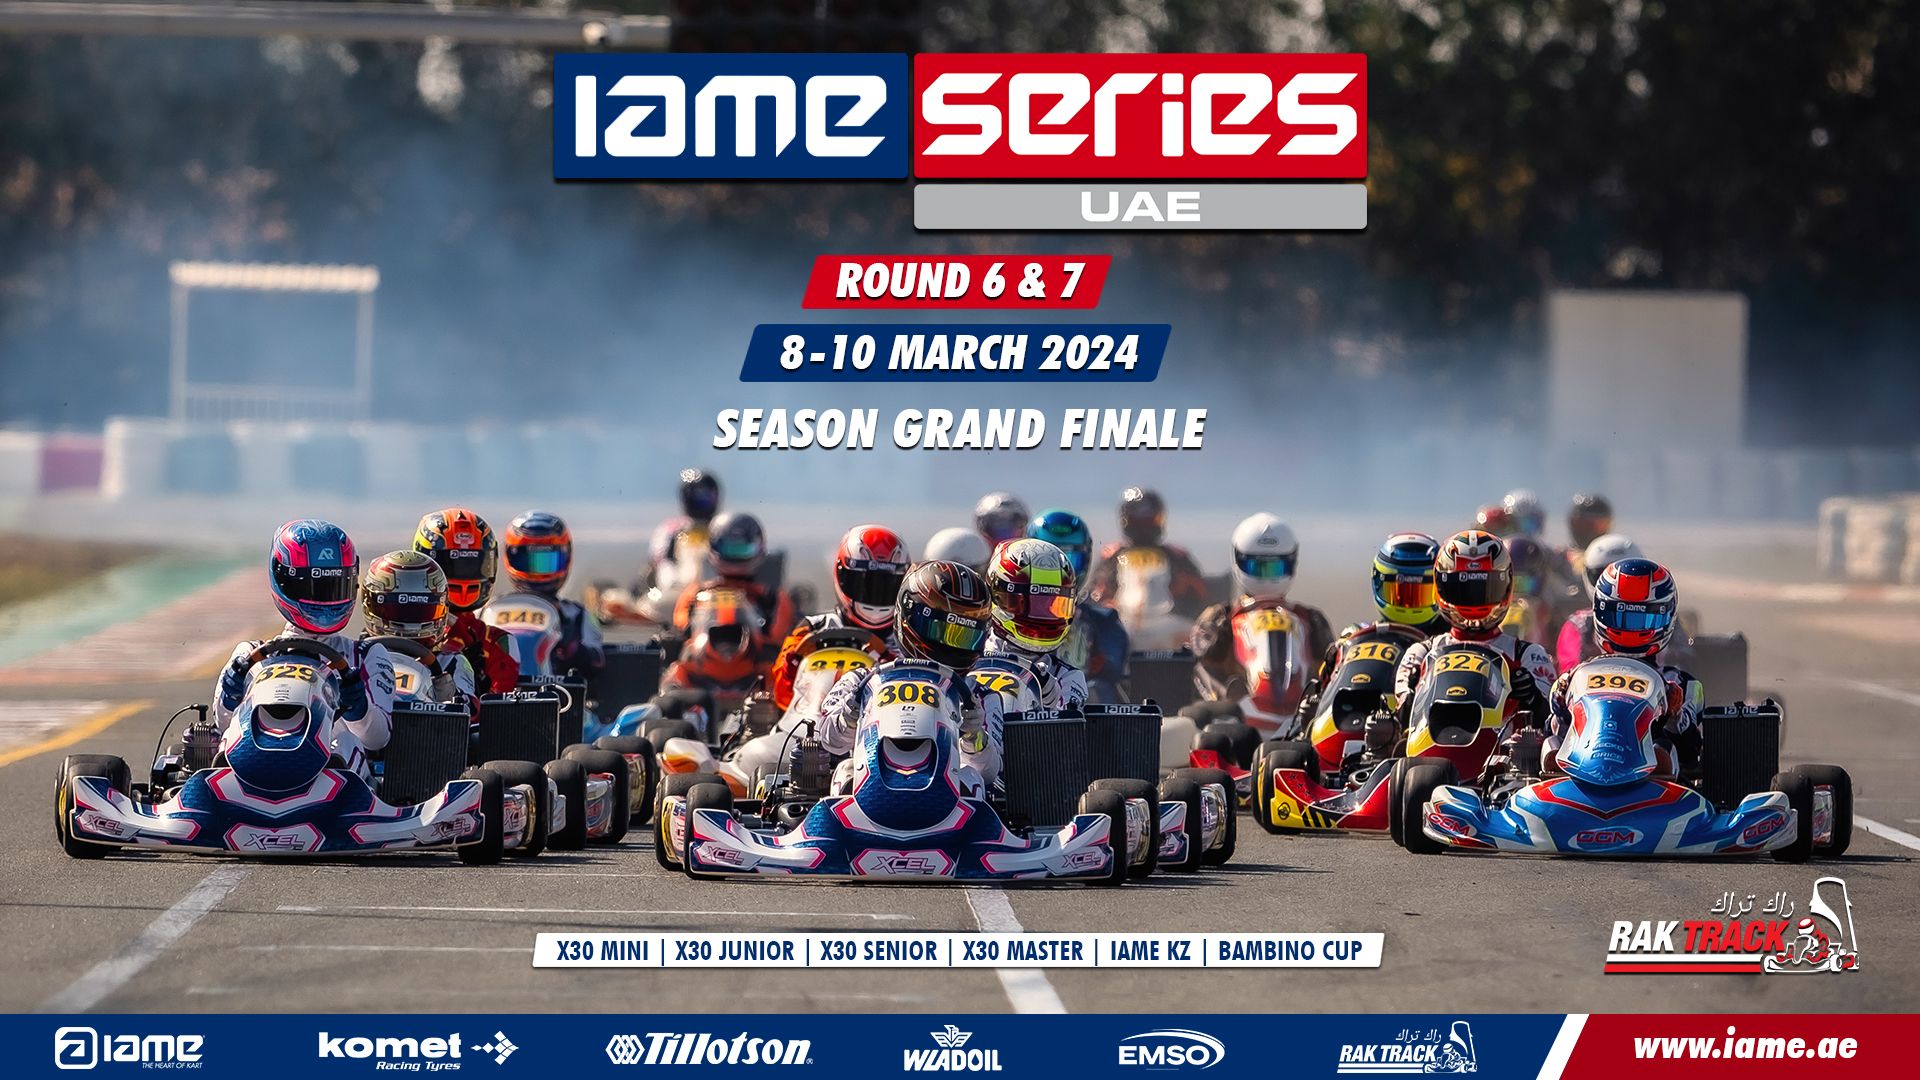 IAME Series UAE Round 6 Results: A Thrilling Day at Rak Track After a postponement due to intense rain